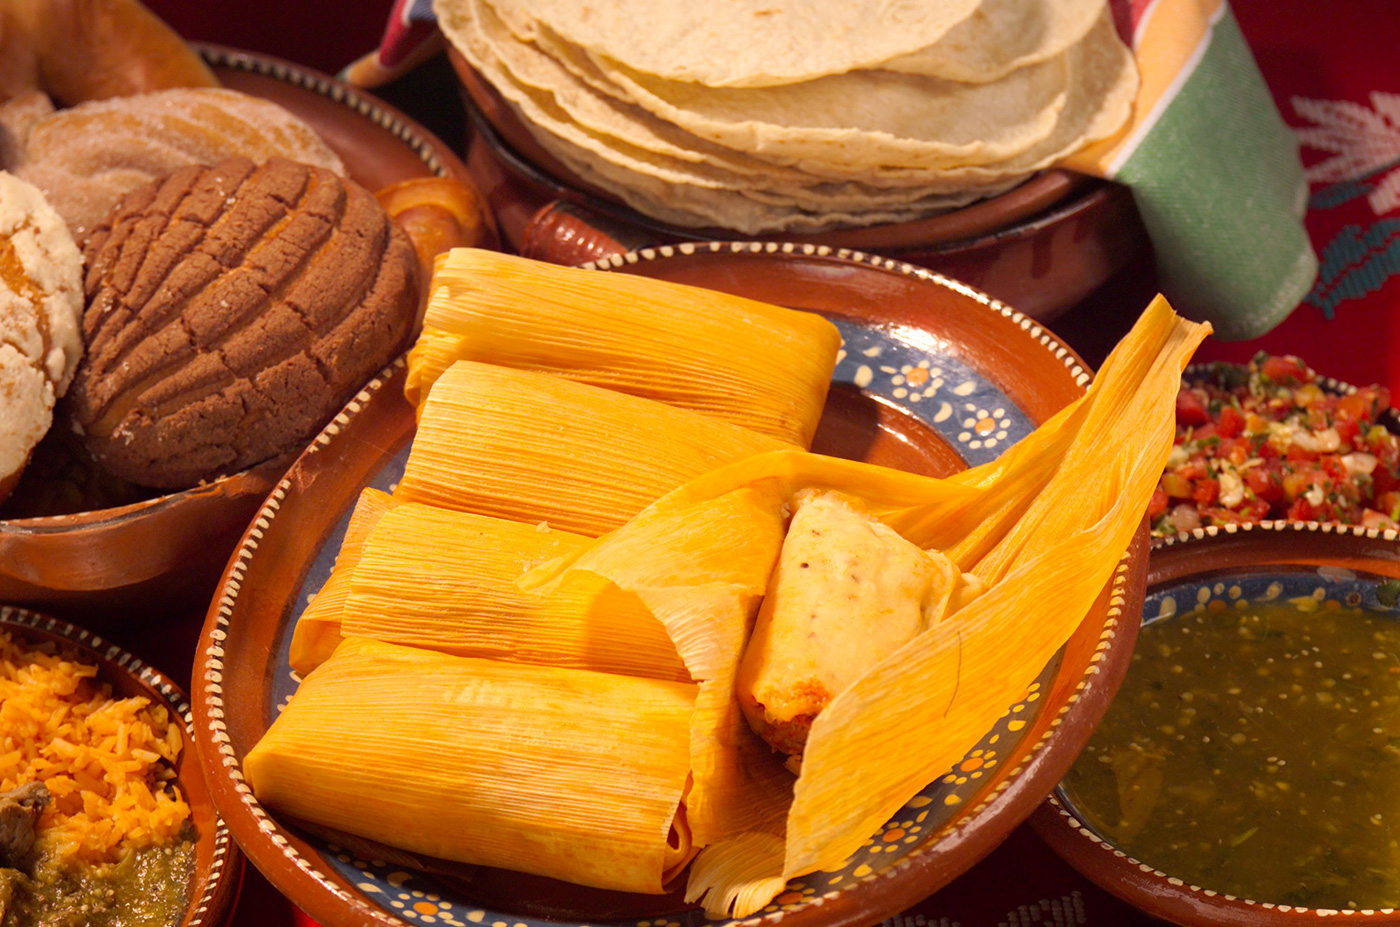 We are excited to offer our delicious and authentic Mexican cuisine for your next event.